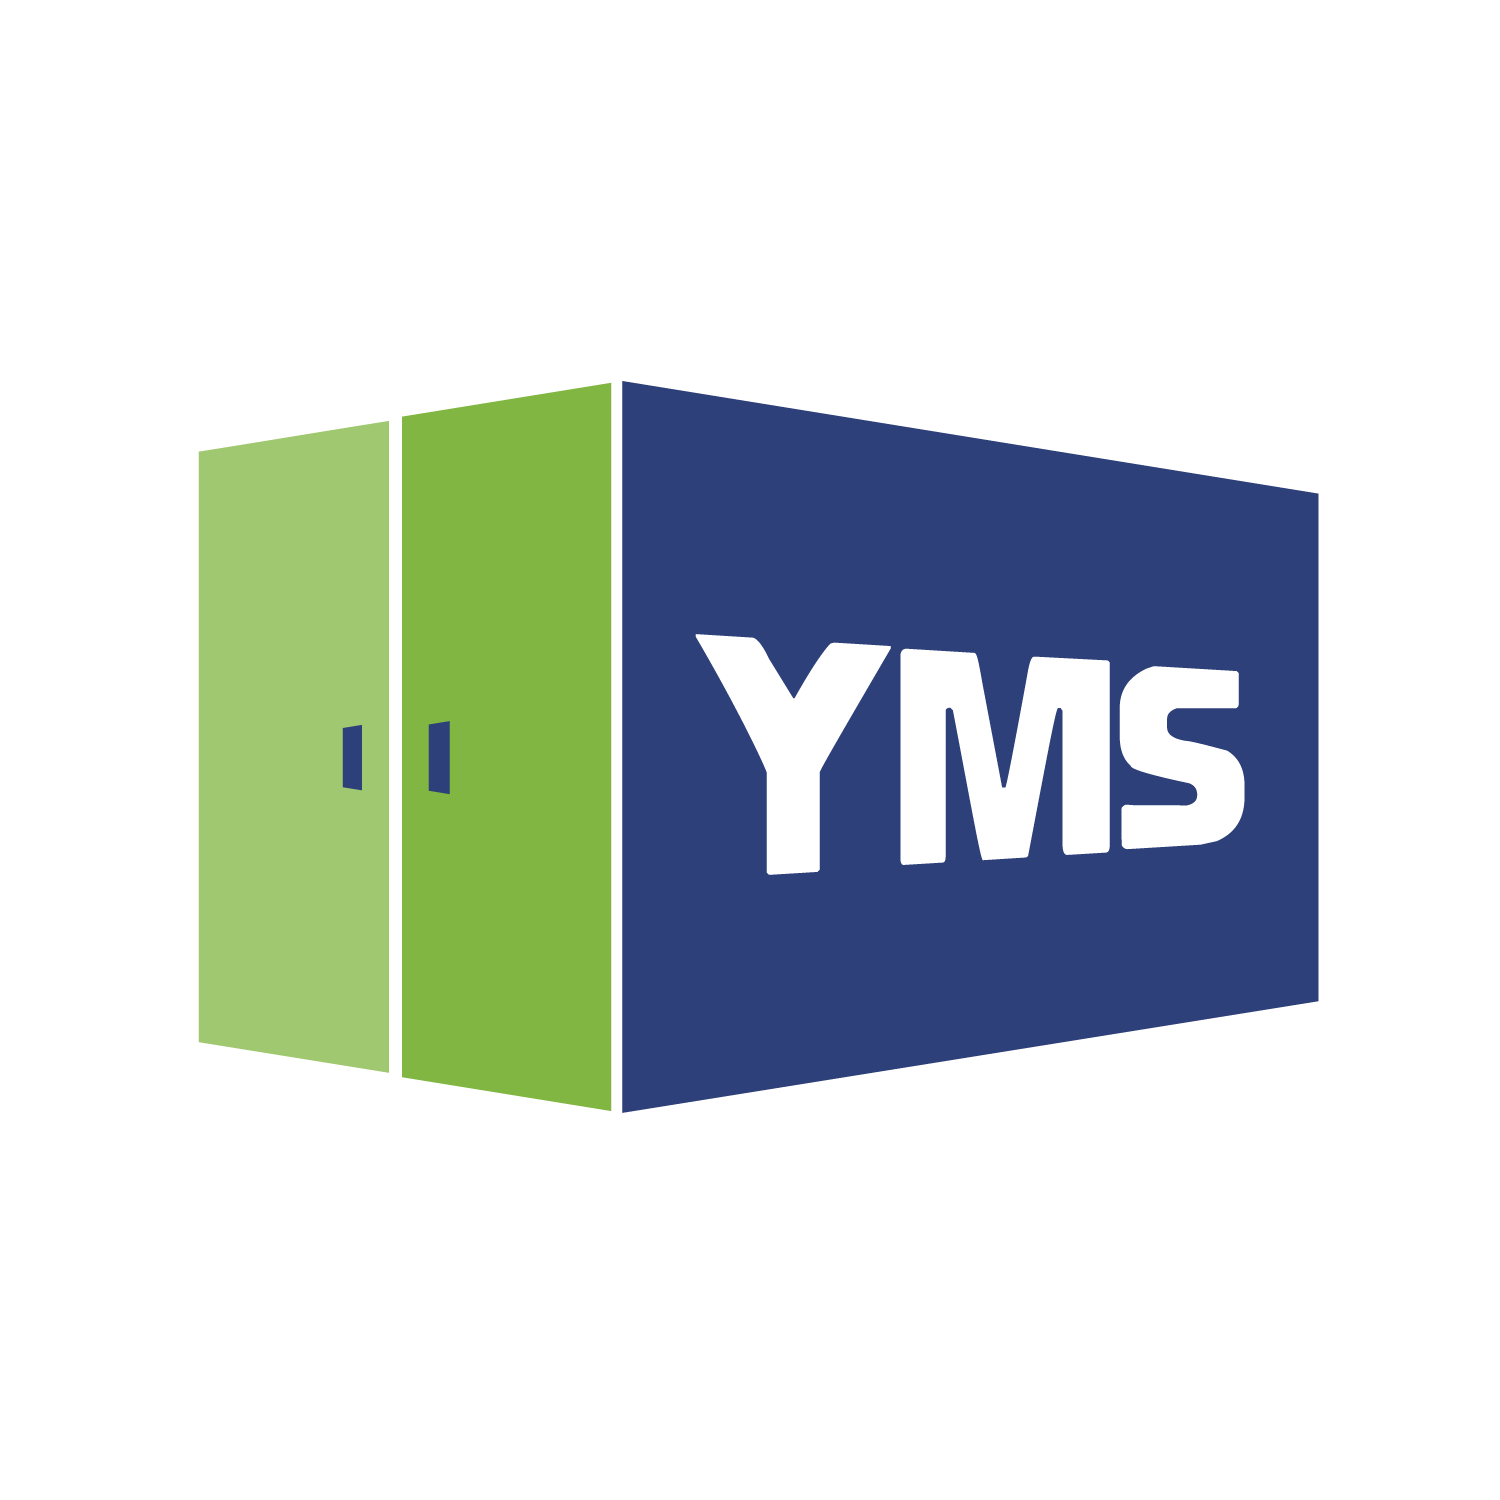 Yard Management System (YMS)